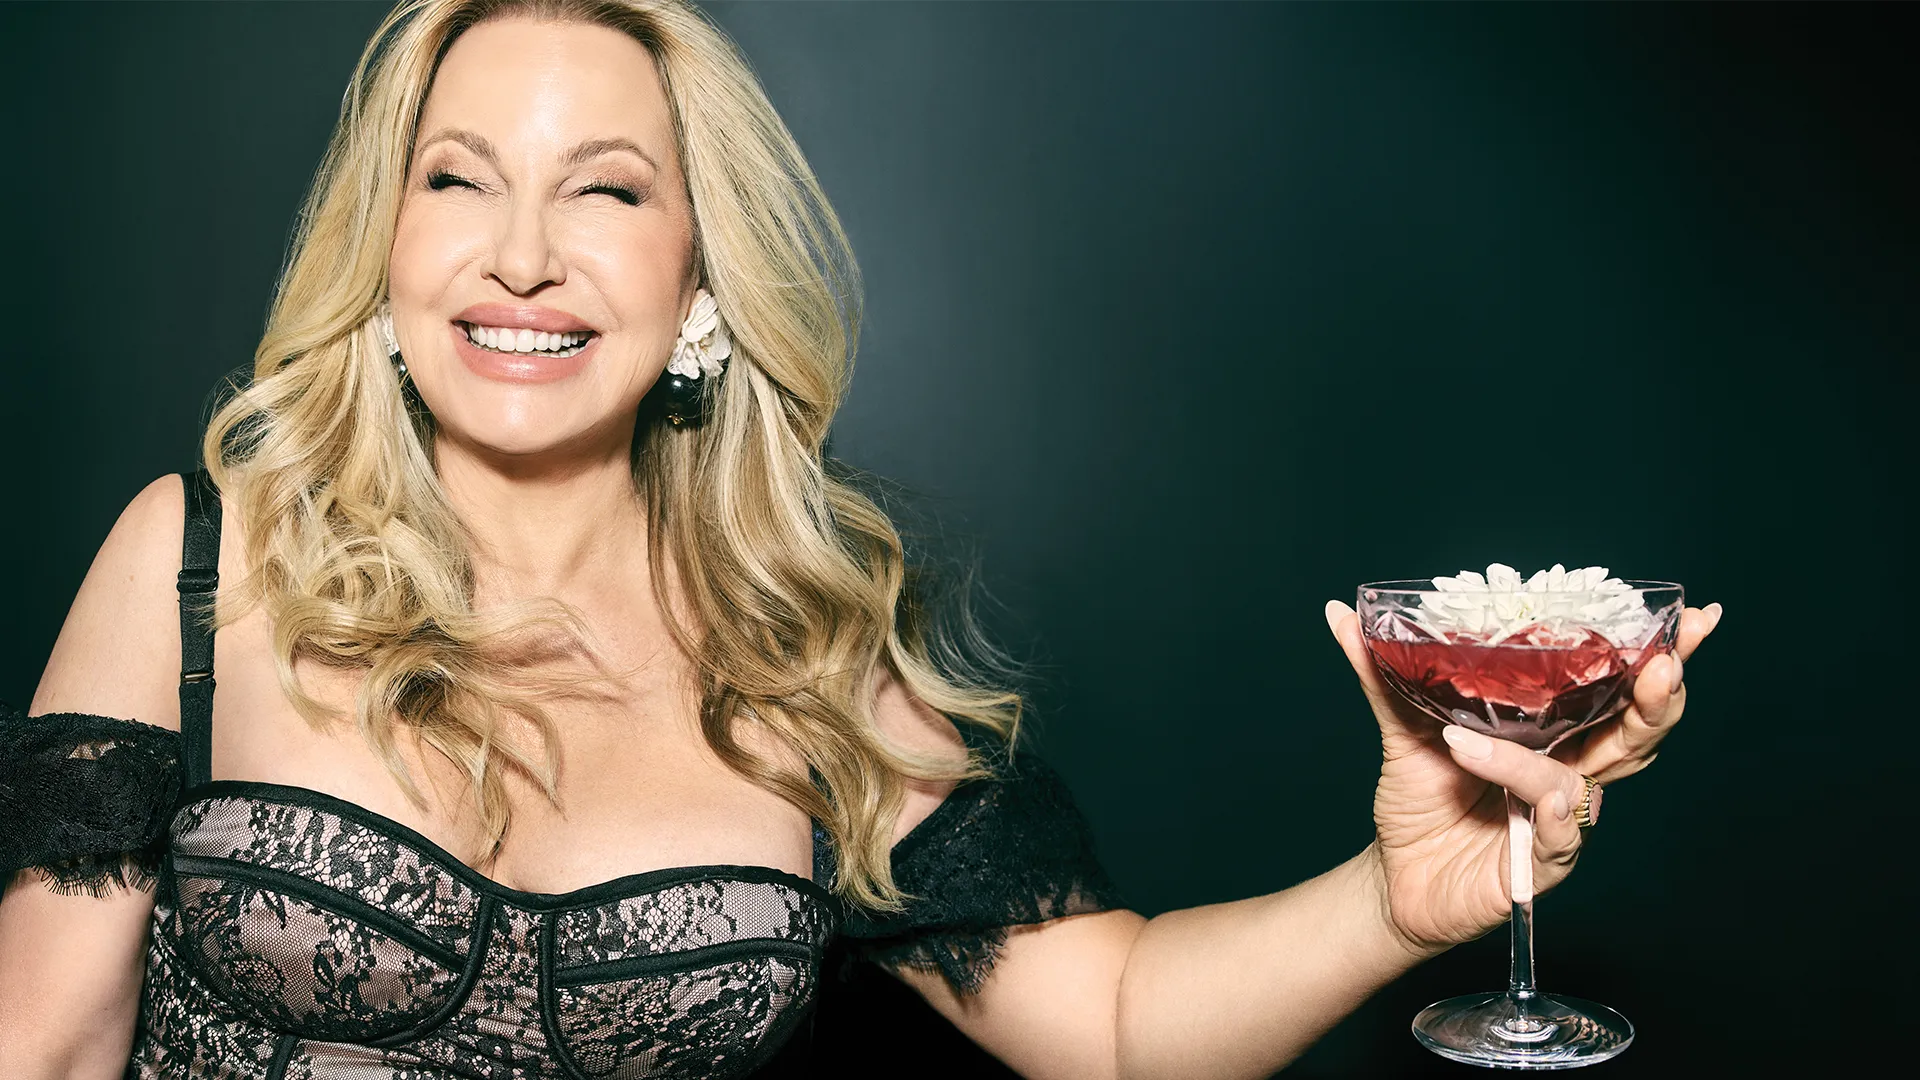 American Pie Star Jennifer Coolidge Almost Confirmed to Cast in Only Murders In The Building [EXCLUSIVE]